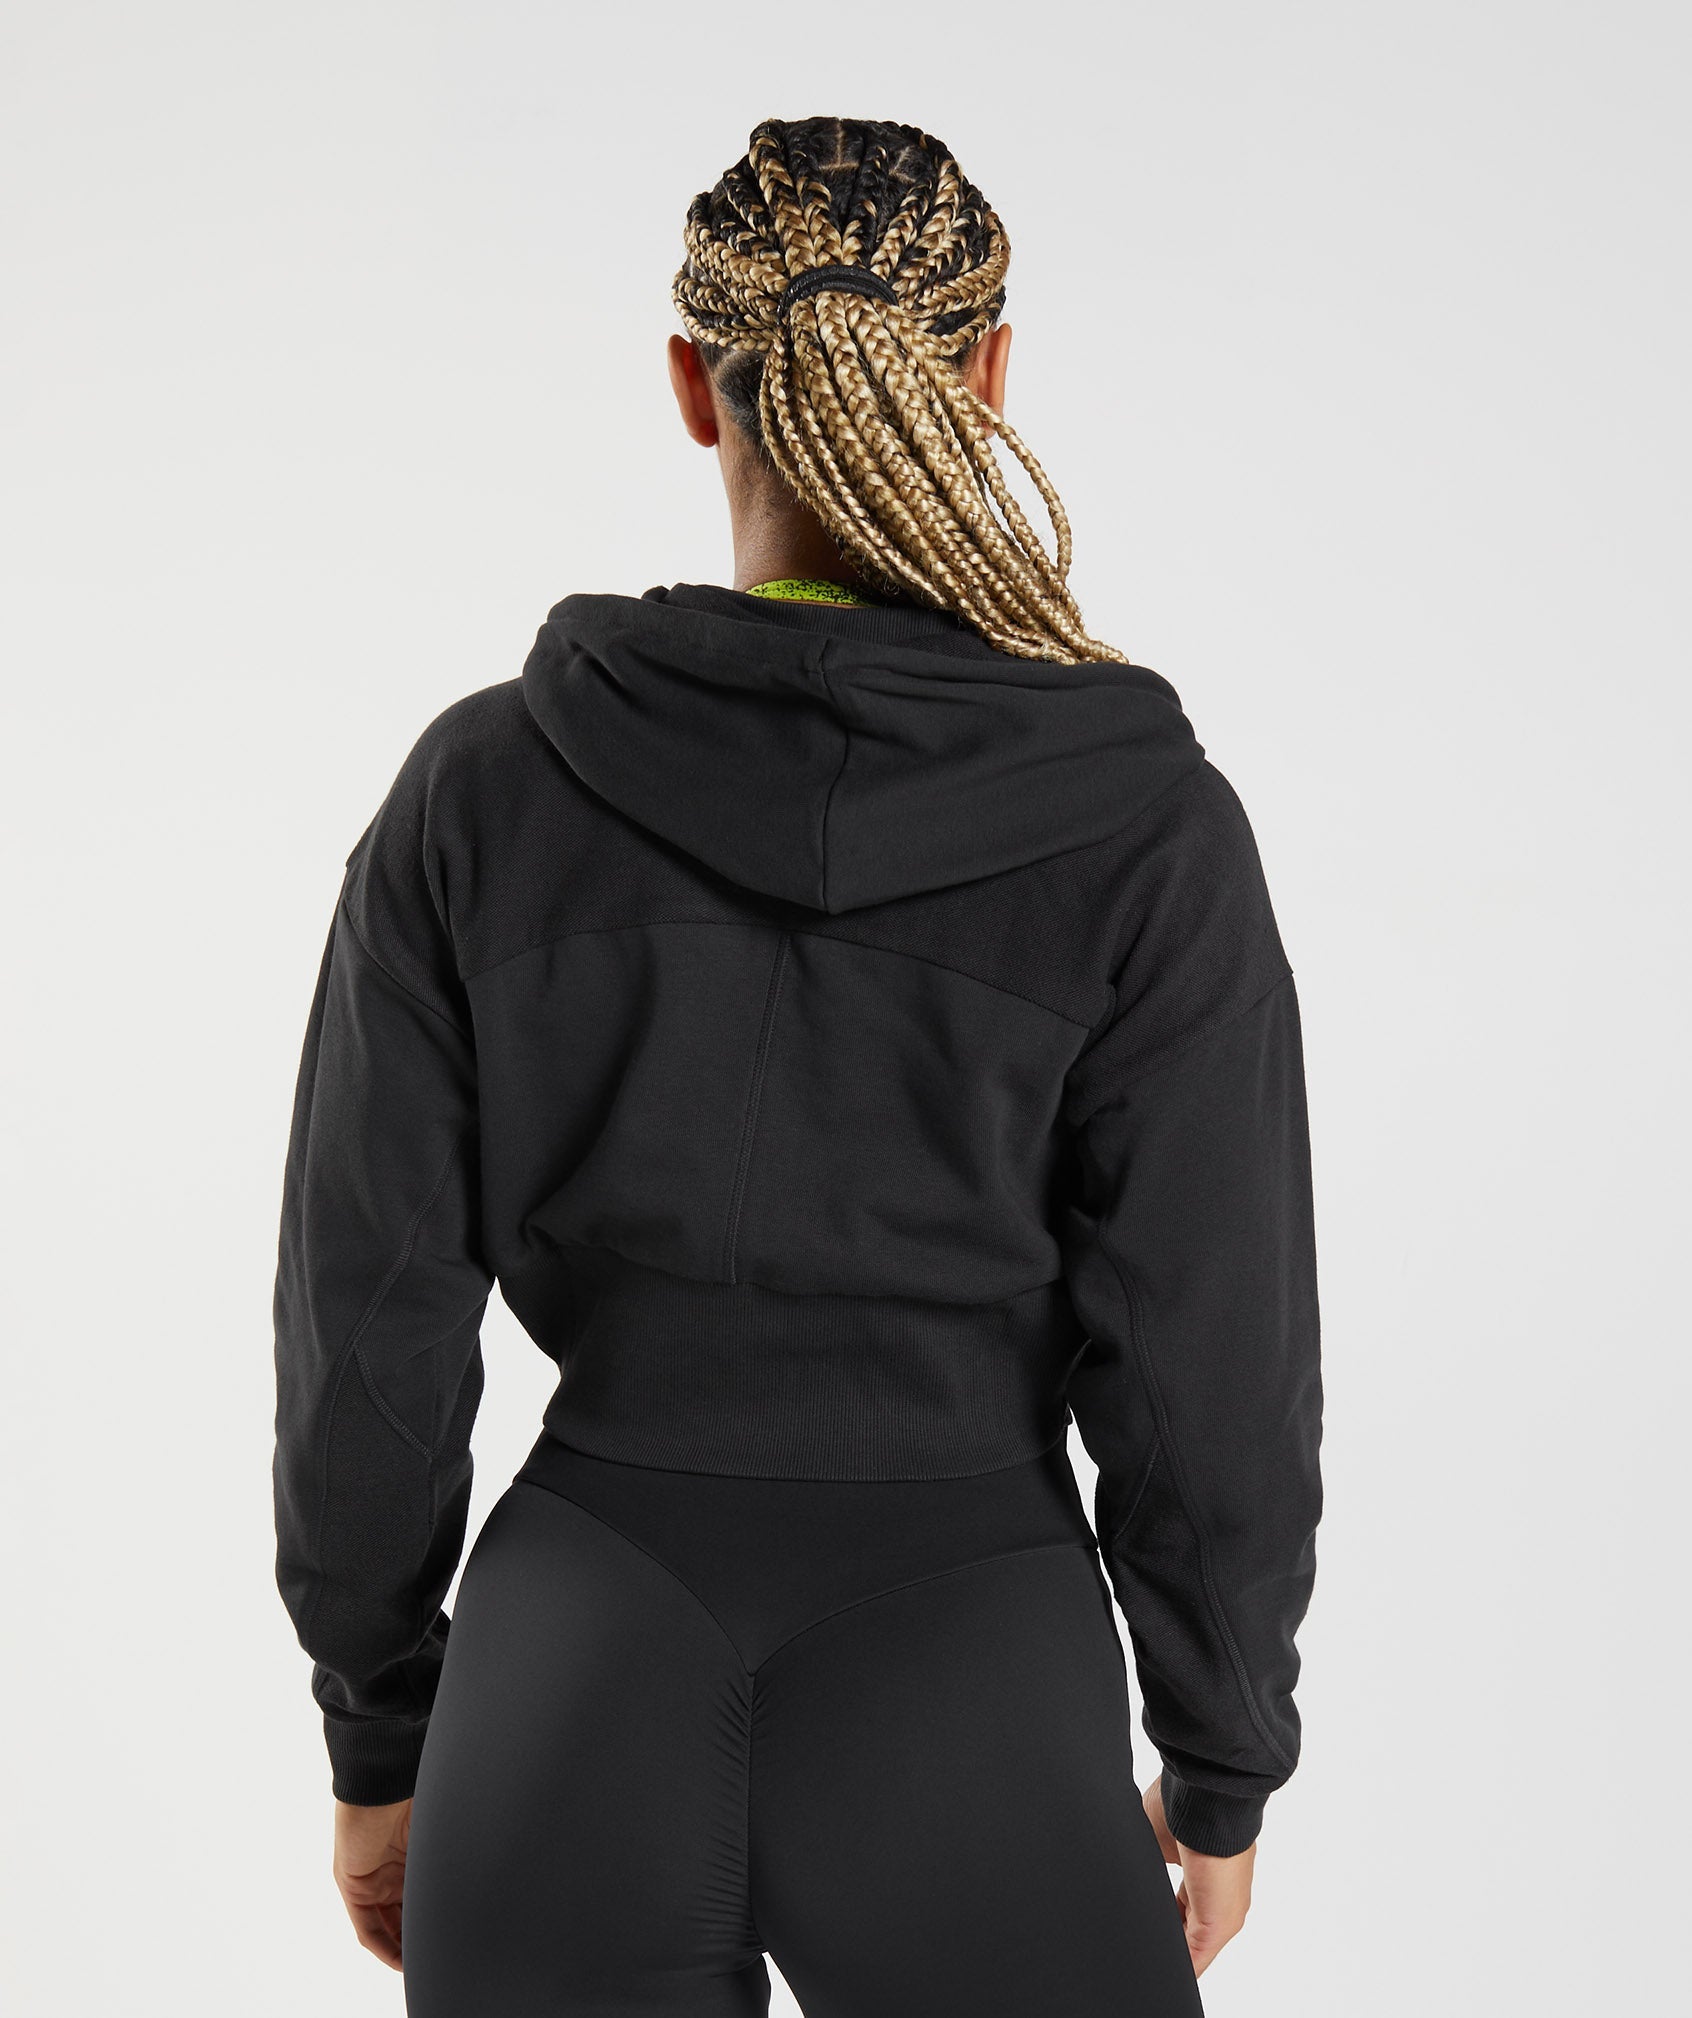 GS Power Cropped Zip Hoodie product image 2